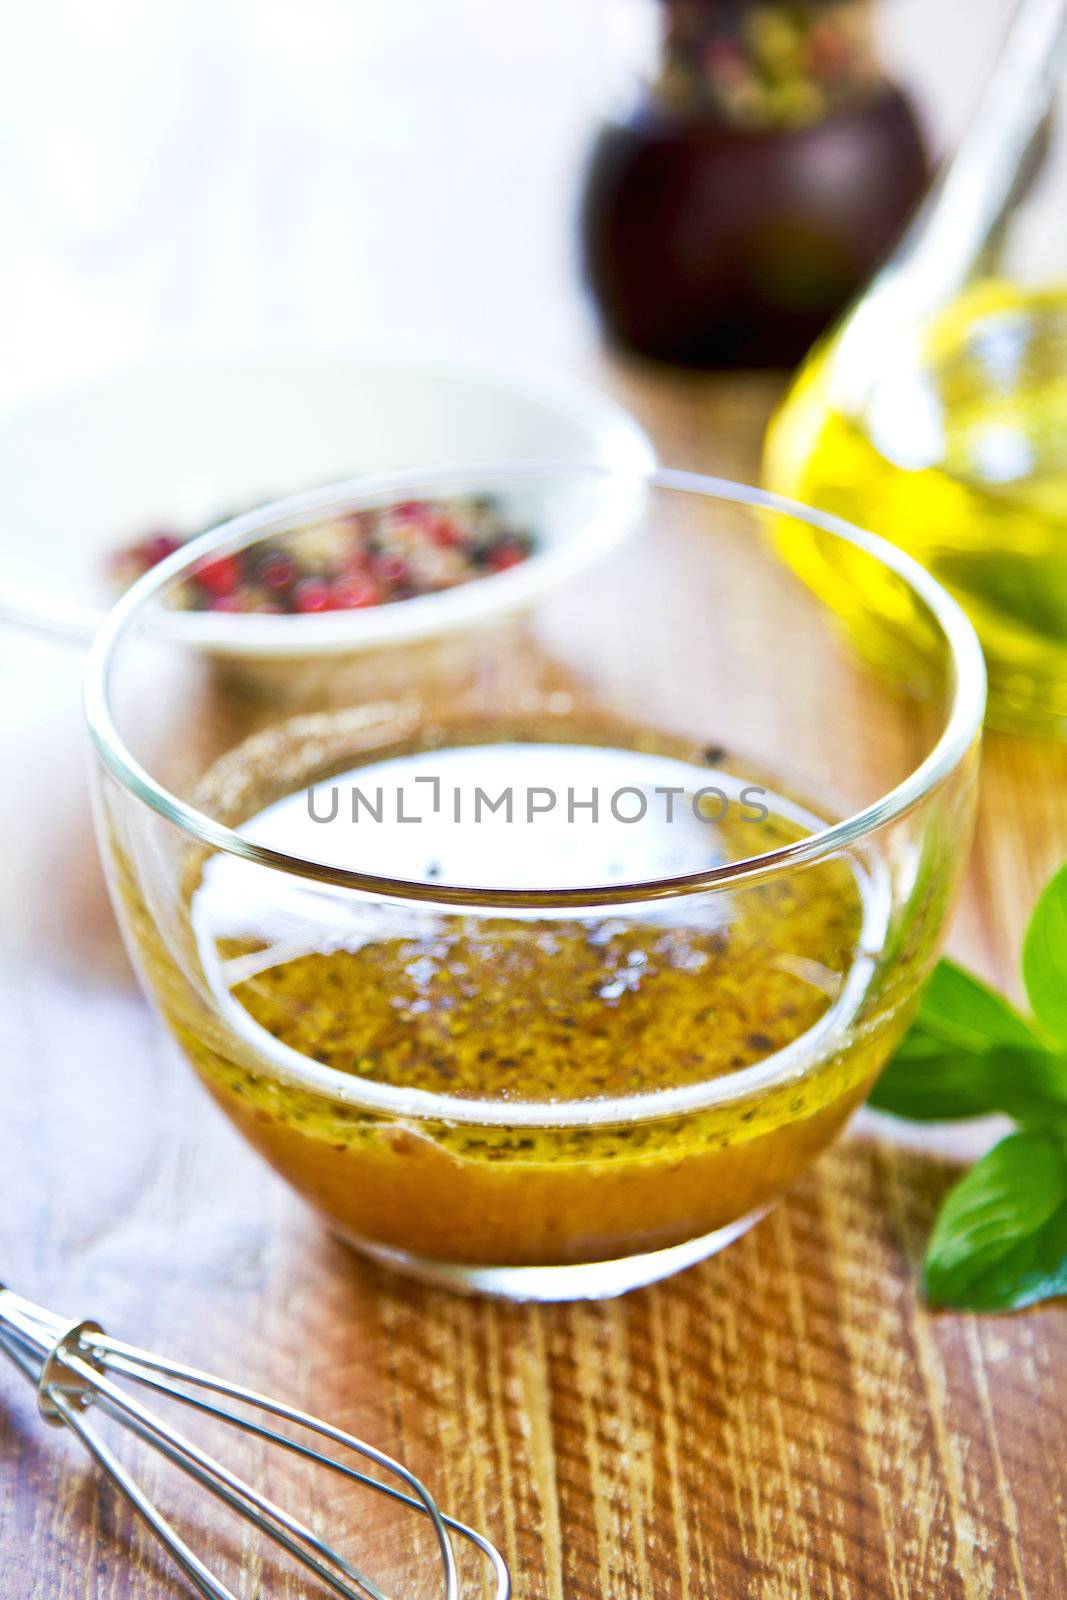 Homemade salad dressing by vanillaechoes